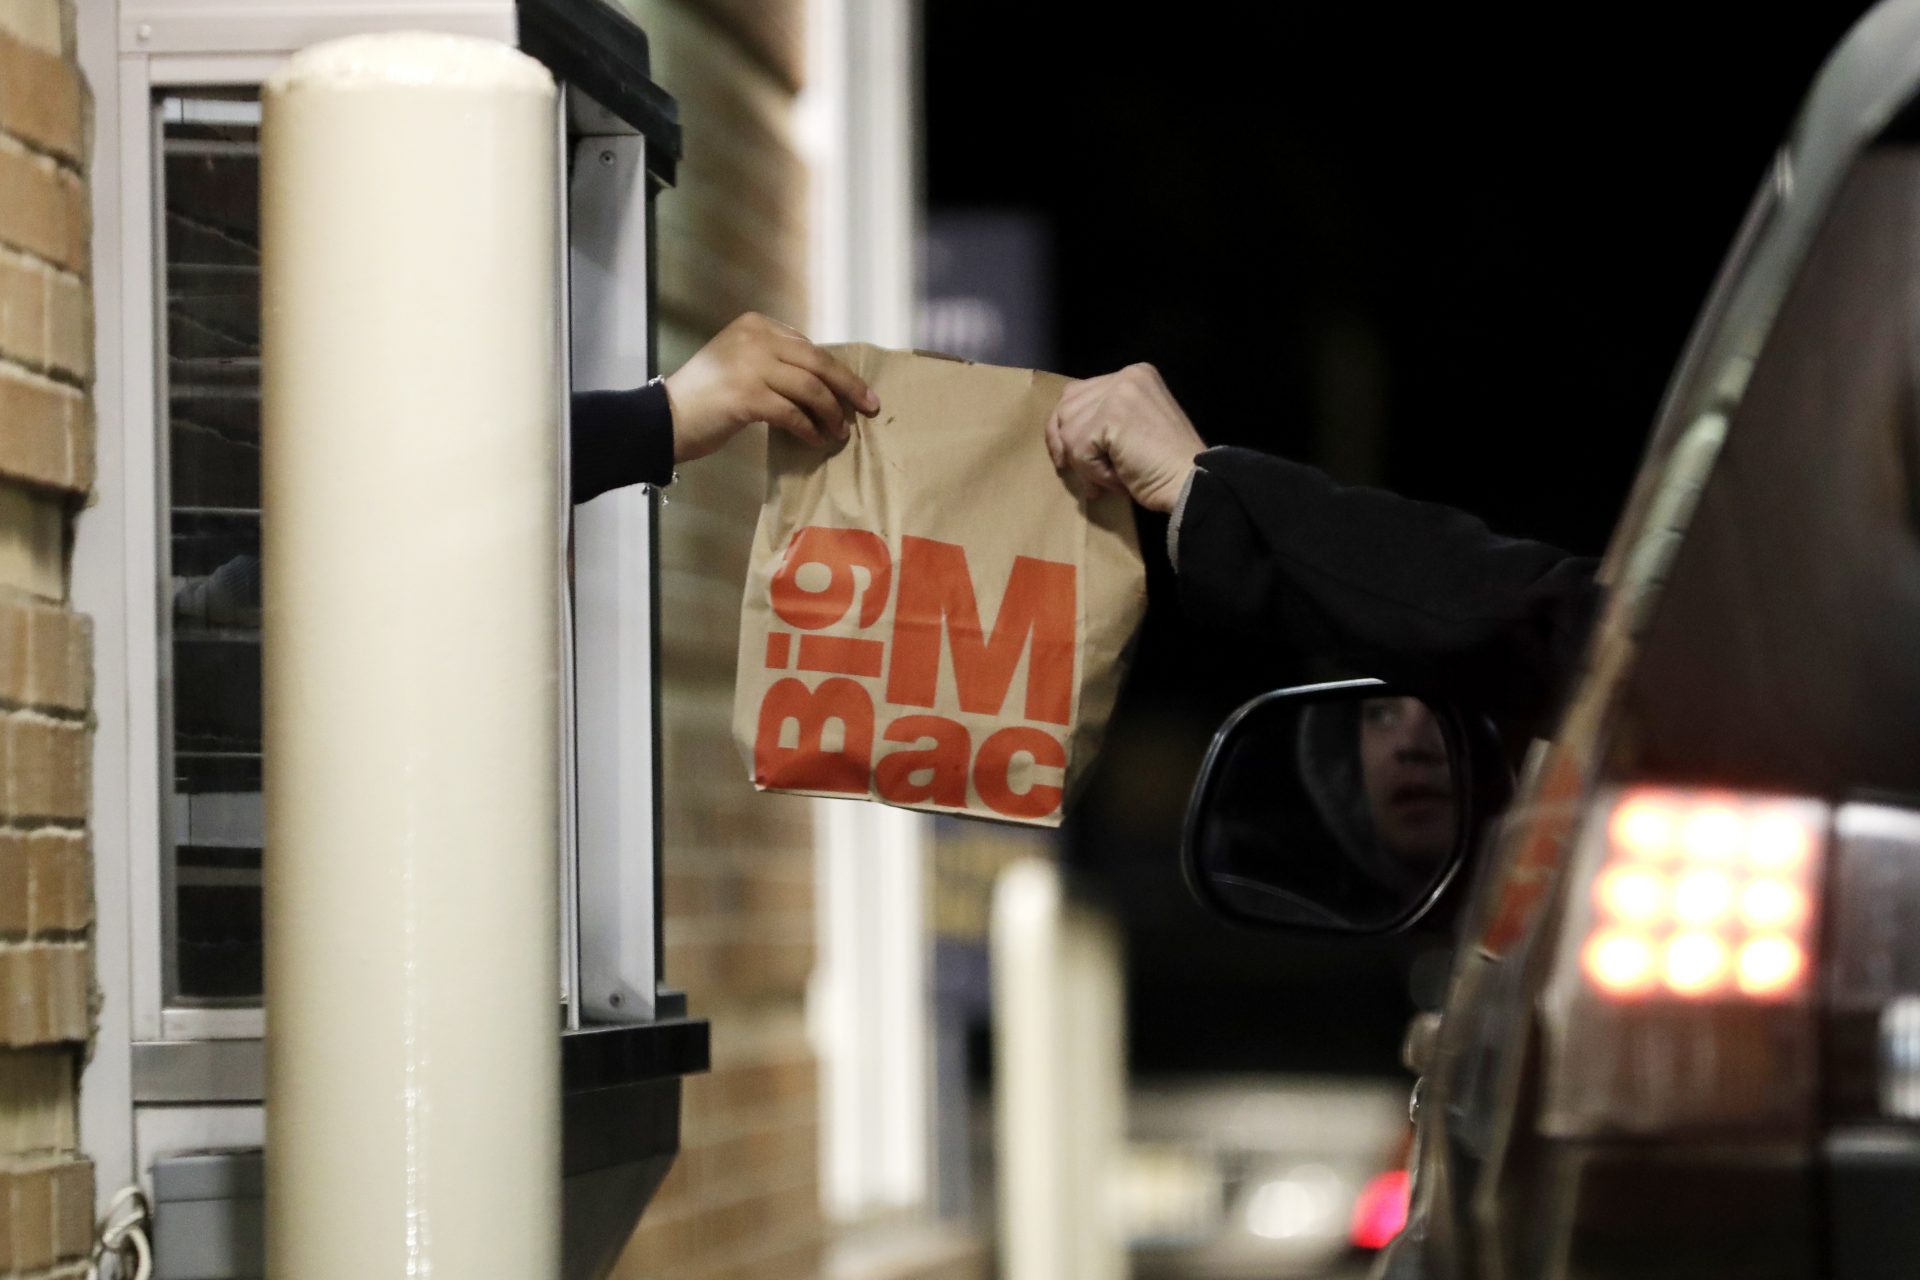 A customer, right, picks up his food at a McDonald in Wheeling, Ill., Sunday, March 15, 2020. Illinois Gov. J.B. Pritzker on Sunday ordered all bars and restaurants in the state to close starting Monday night, March 16 through March 30.